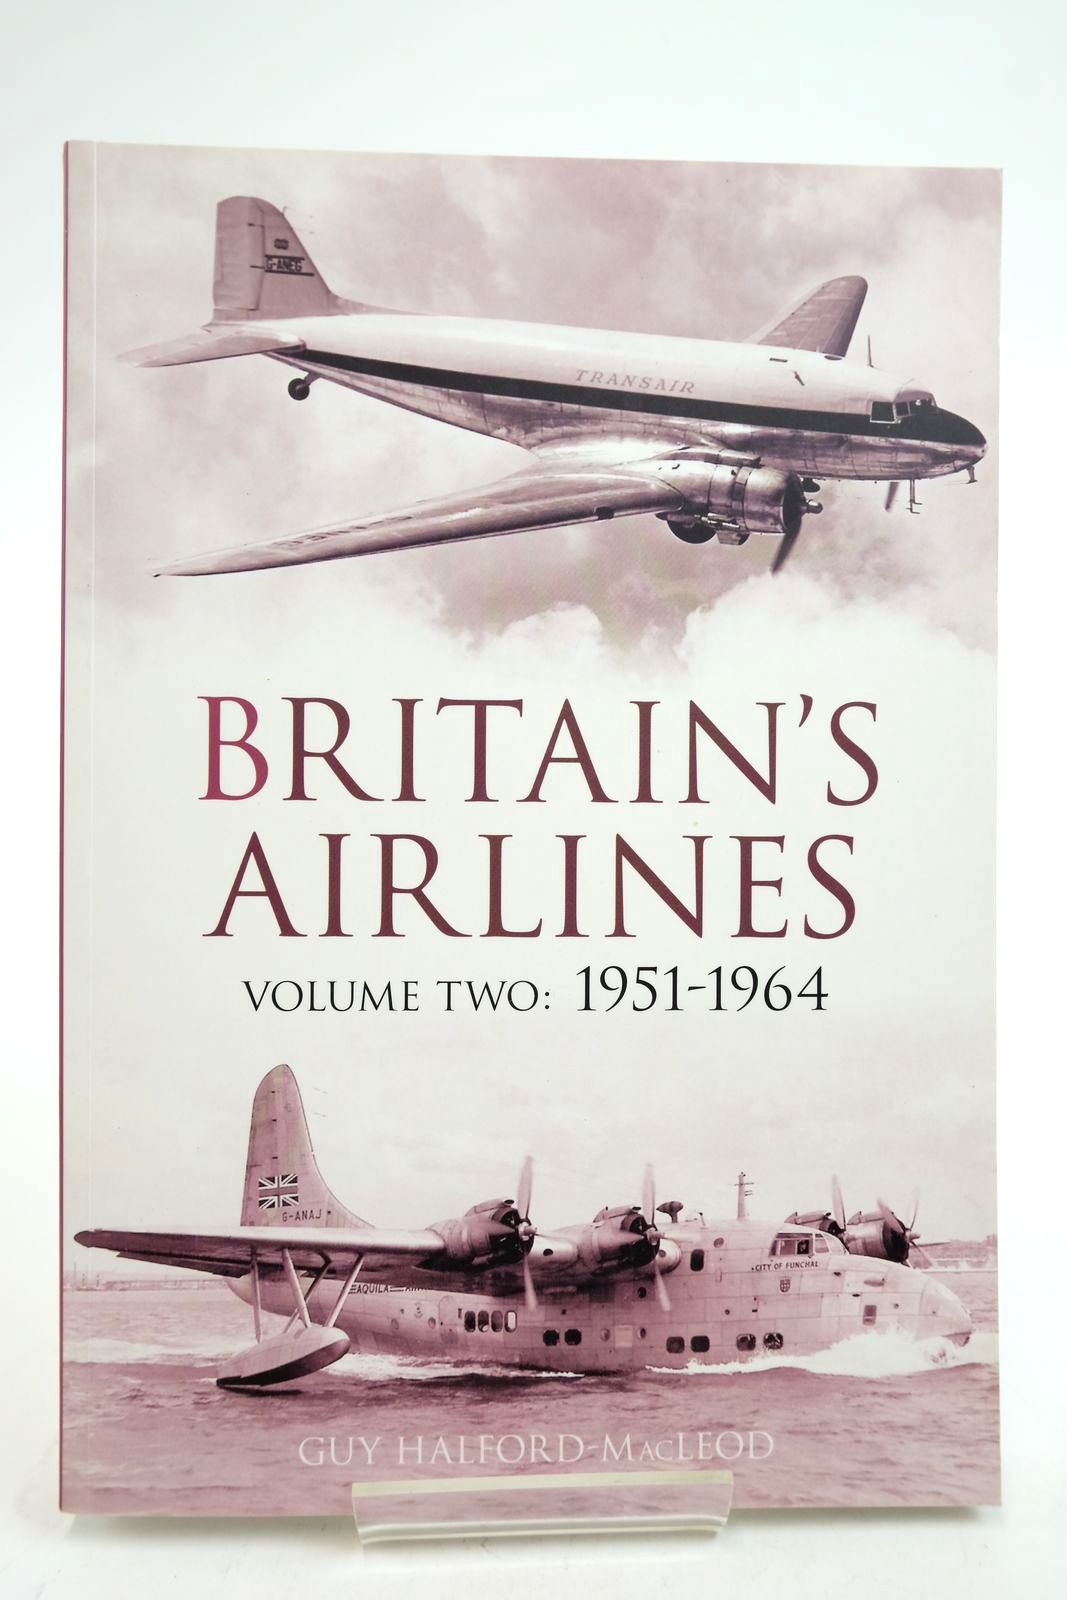 Photo of BRITAIN'S AIRLINES VOLUME TWO: 1951-1964 written by Halford-Macleod, Guy published by Tempus Publishing Ltd (STOCK CODE: 2139367)  for sale by Stella & Rose's Books